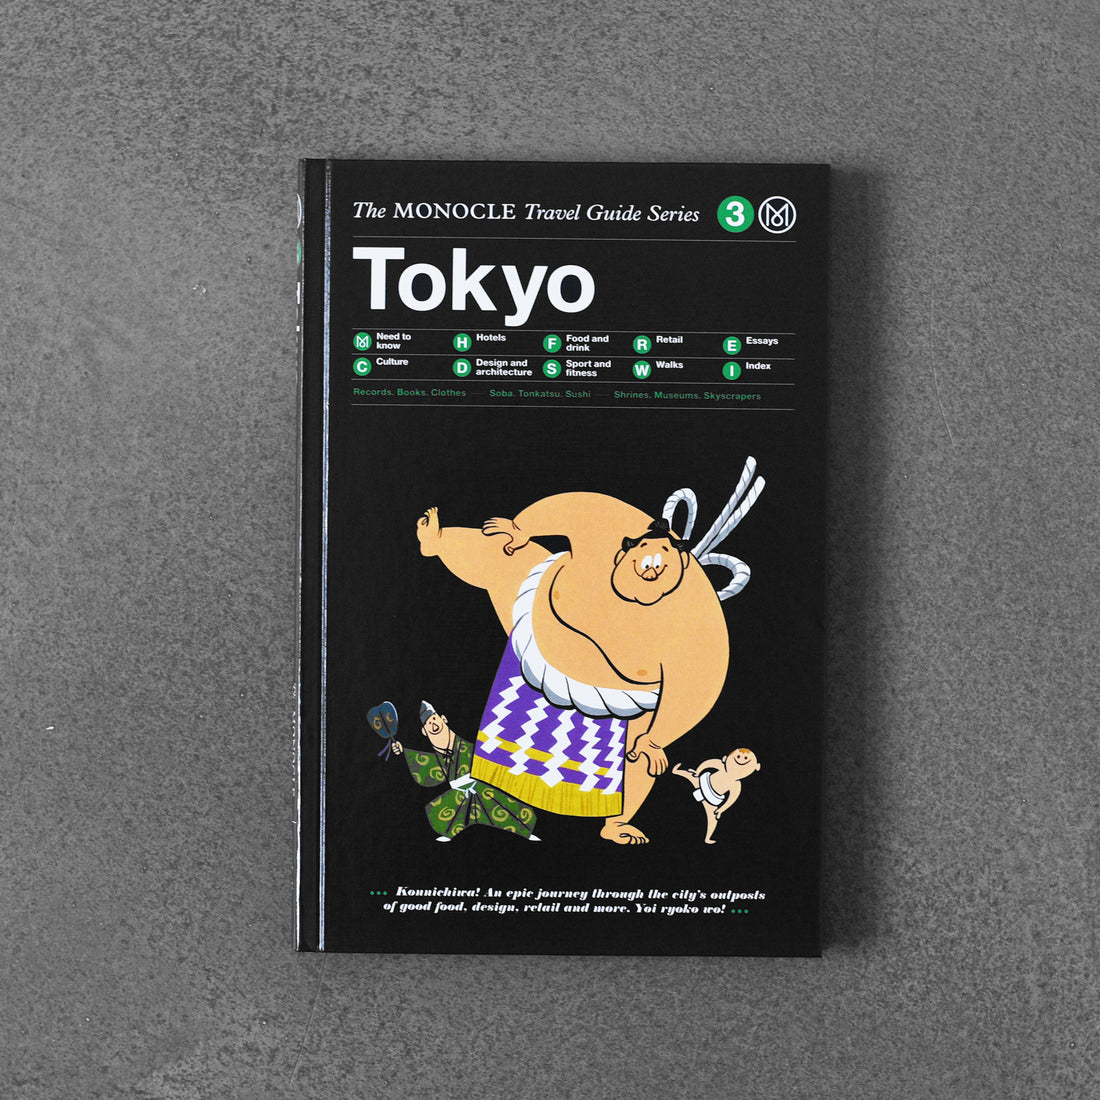 The Monocle Travel Guide Series Tokyo